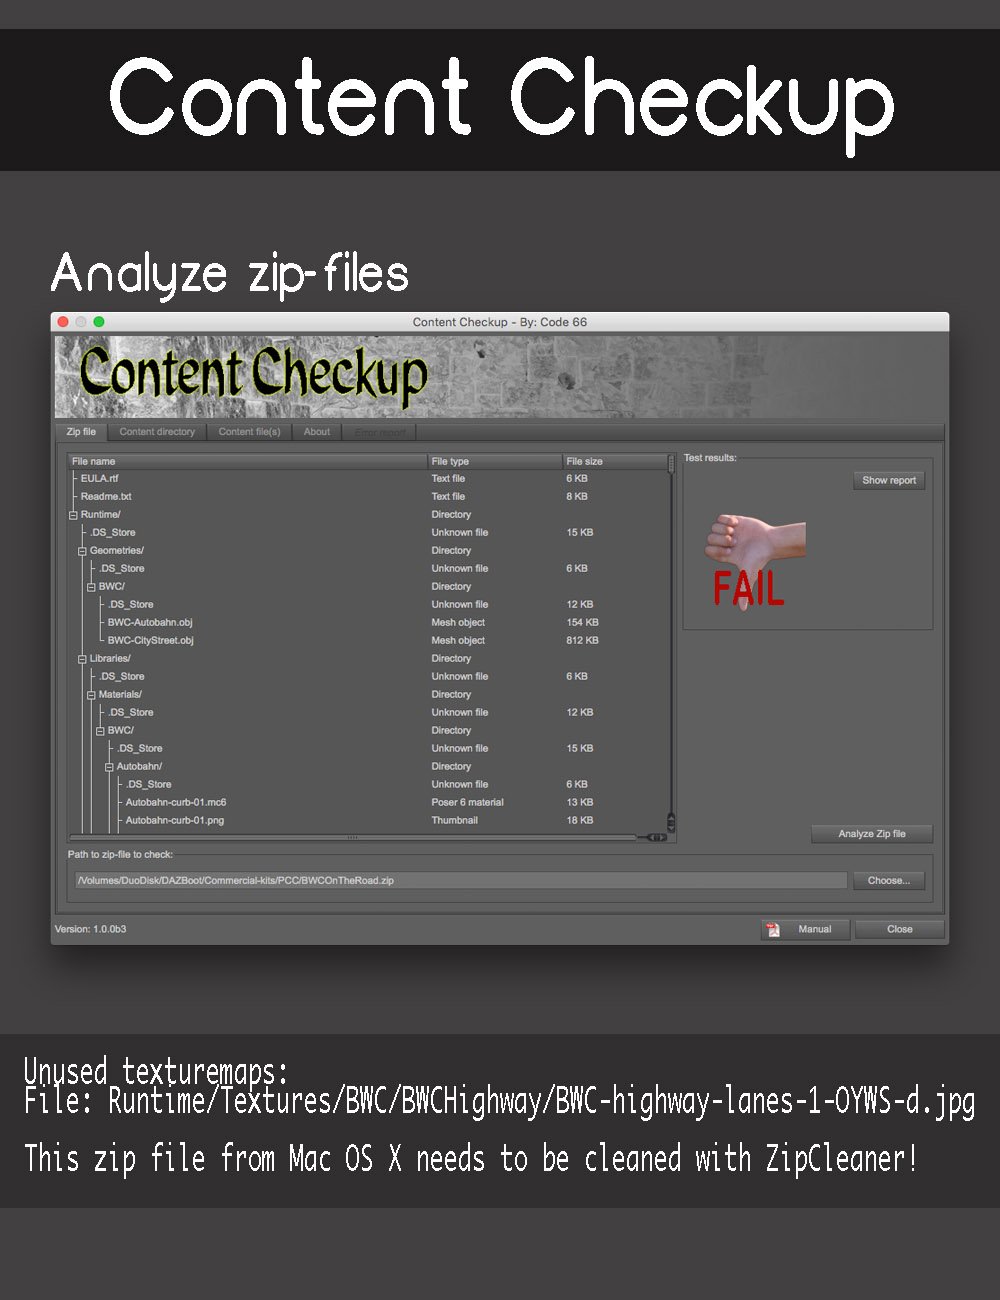 Content Checkup by: Code 66, 3D Models by Daz 3D